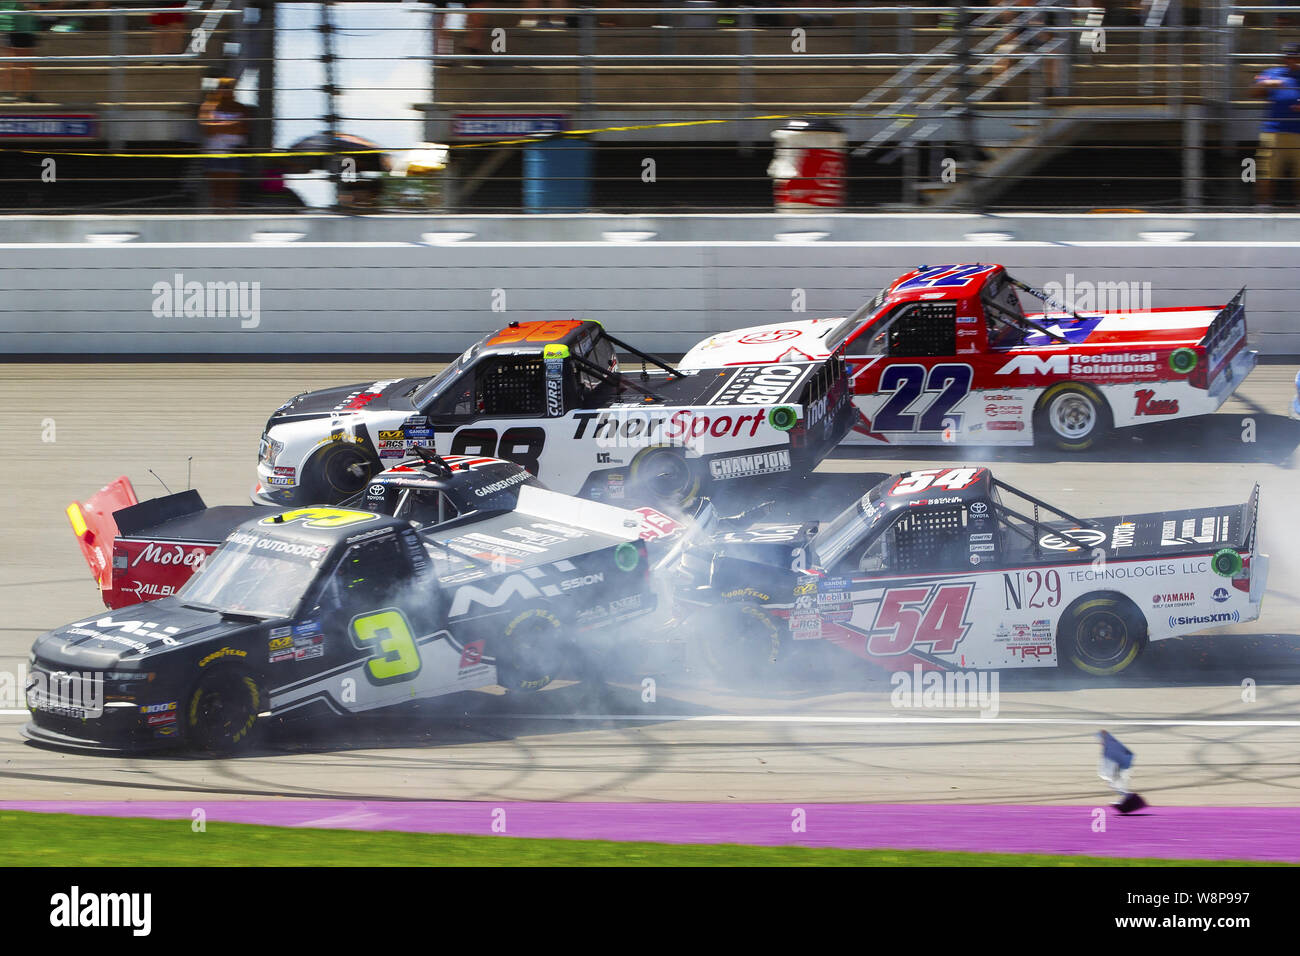 Brooklyn, Michigan, USA. 10th Aug, 2019. Gander Outdoors Truck Series driver NATALIE DECKER (54) and JORDAN ANDERSON (3) crash just before turn one during the 20th Annual Corrigan Oil 200 at Michigan International Speedway. Credit: Scott Mapes/ZUMA Wire/Alamy Live News Stock Photo